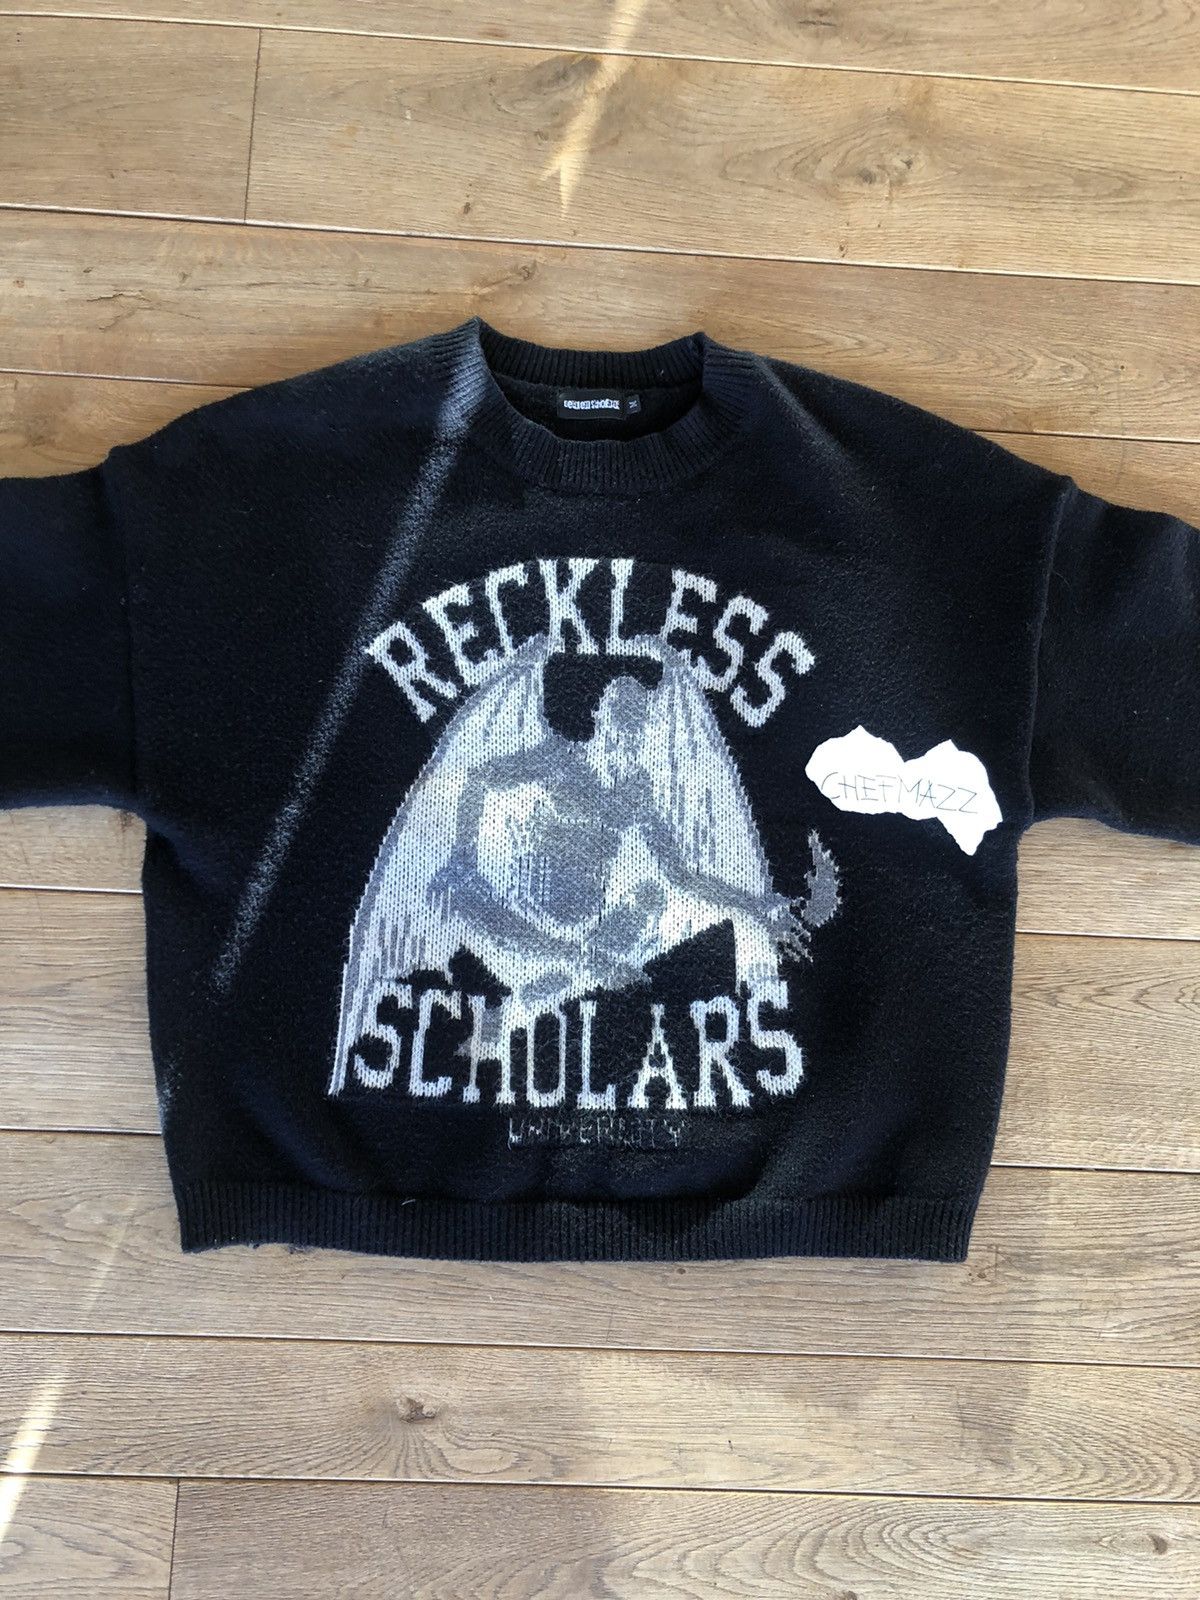 ElyKong Reckless Reckless Scholars Knit | Grailed